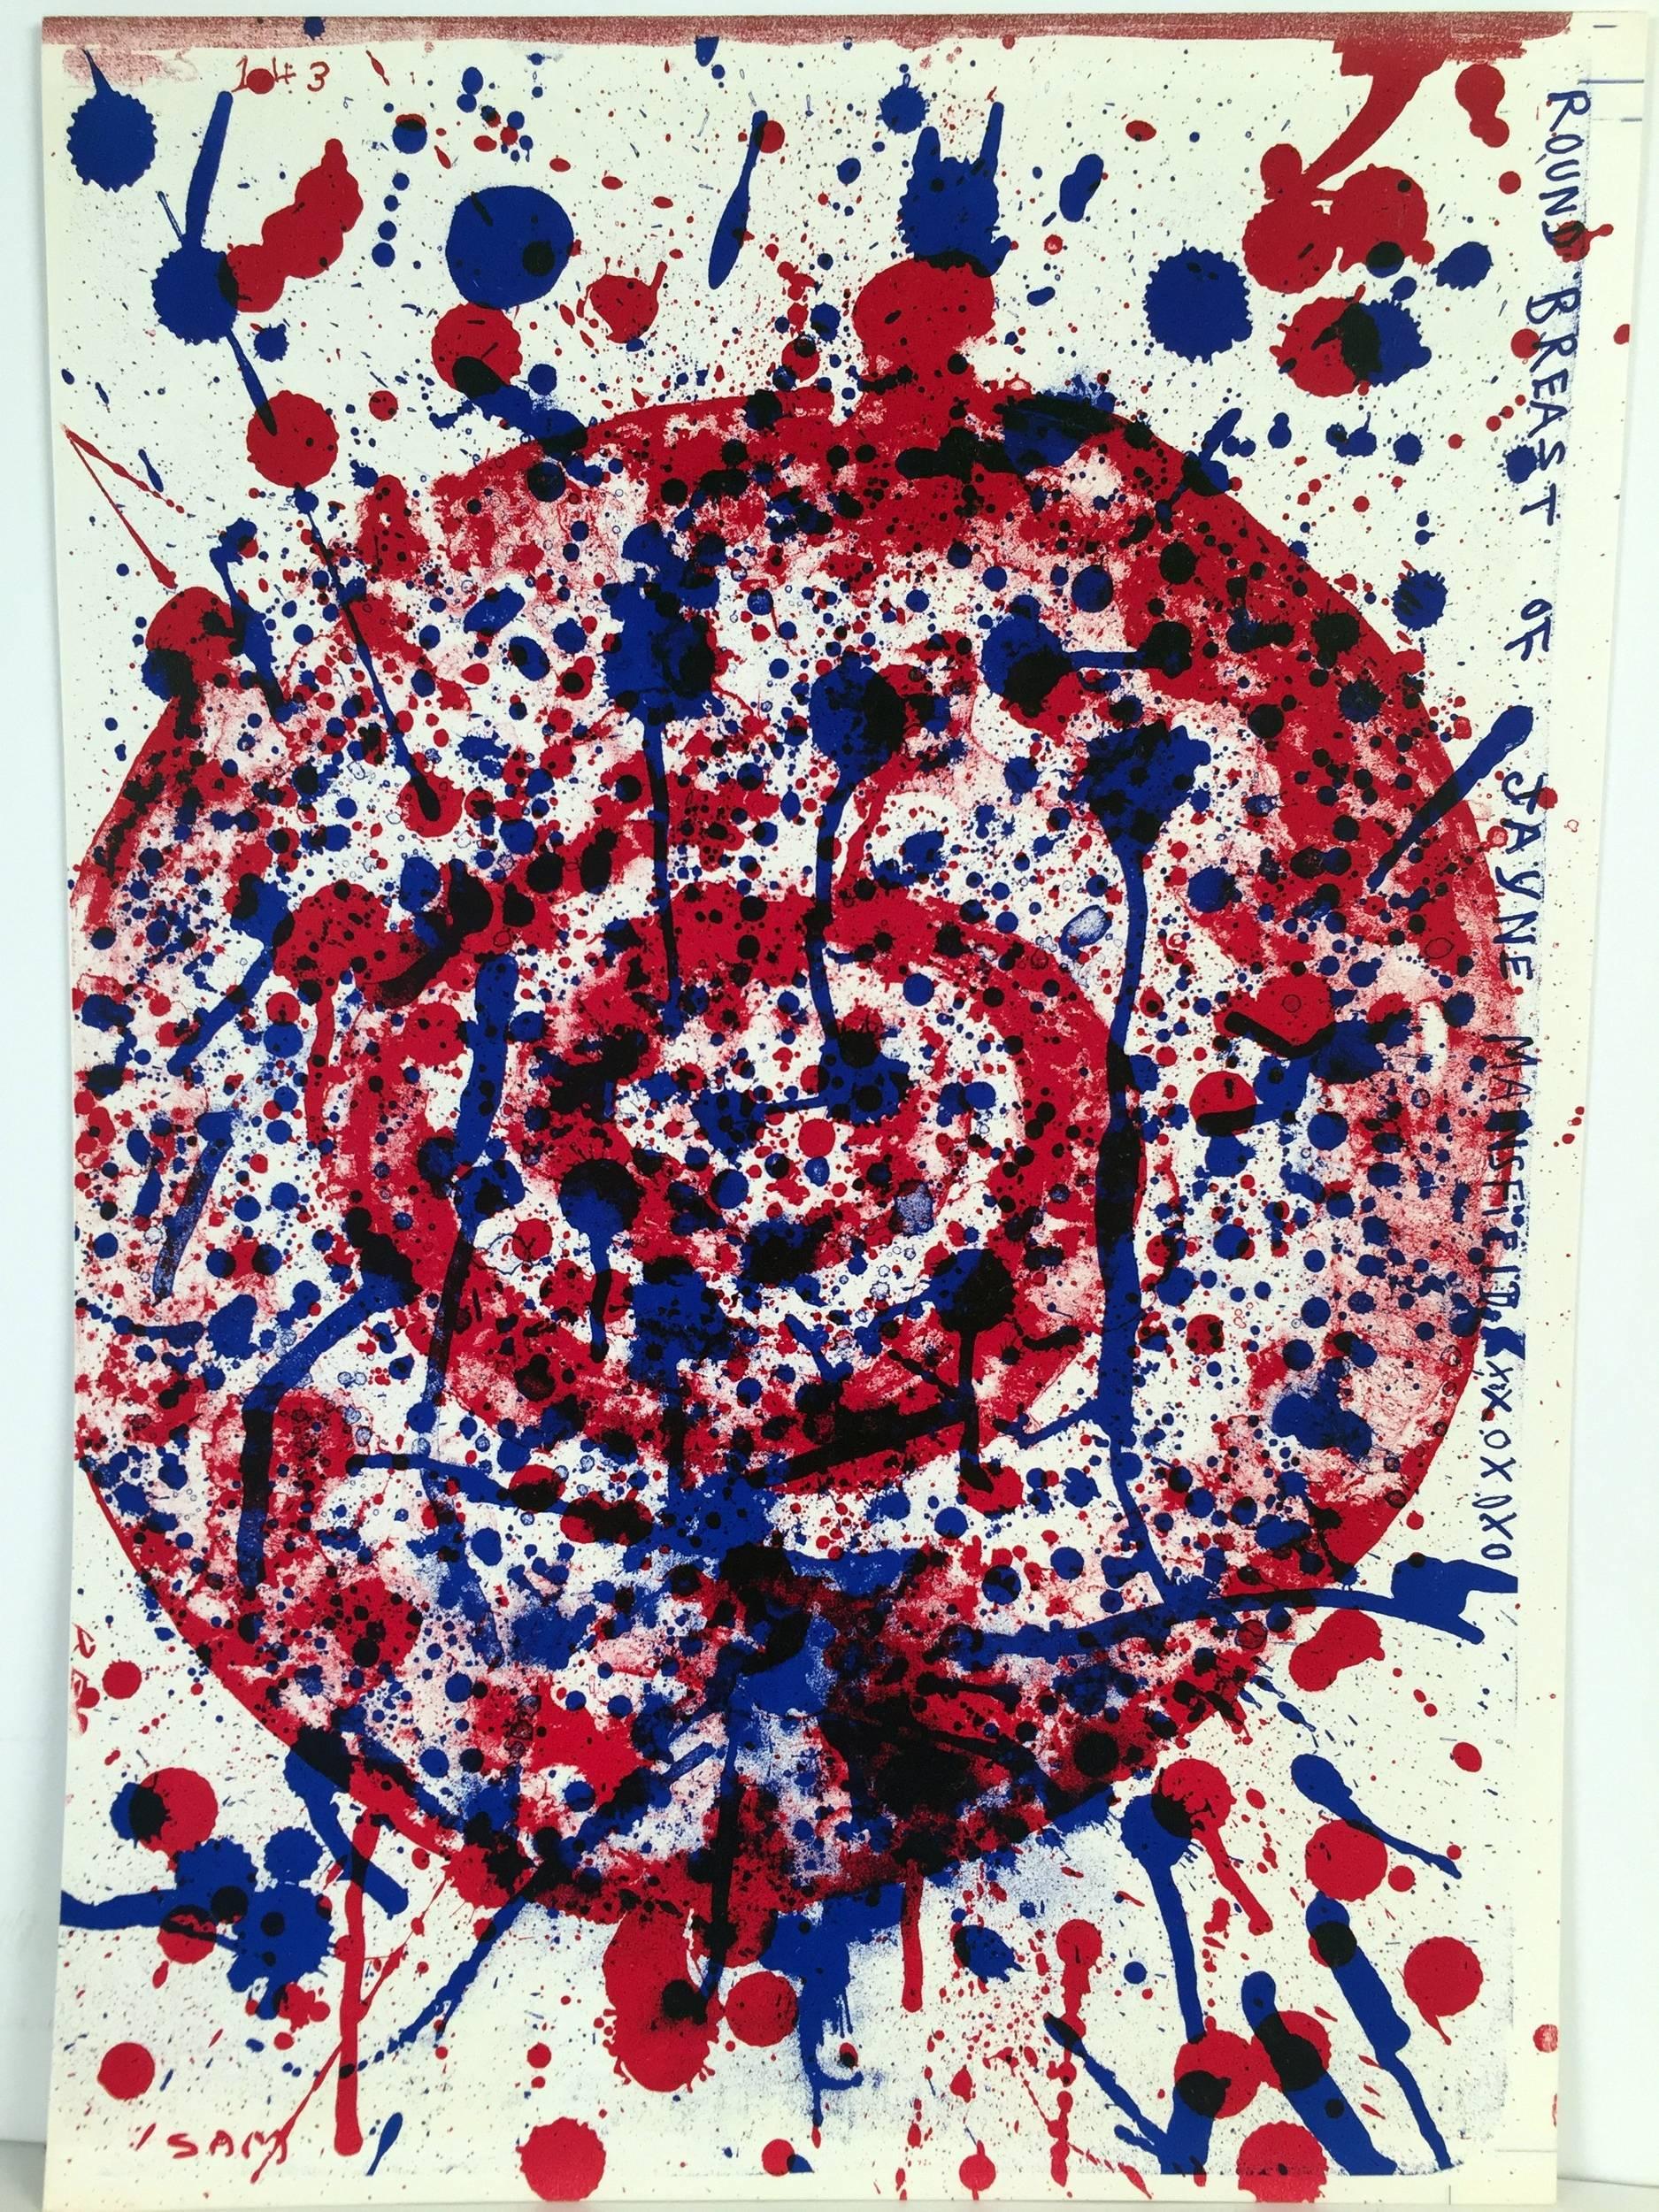 This original lithograph is DOUBLE SIDED.  You can either frame it as a Sam Francis or as a Jim Dine.  Or you can use a double sided frame with glass on each side.  I have seen that done too.  

This is an original screenprint from the portfolio